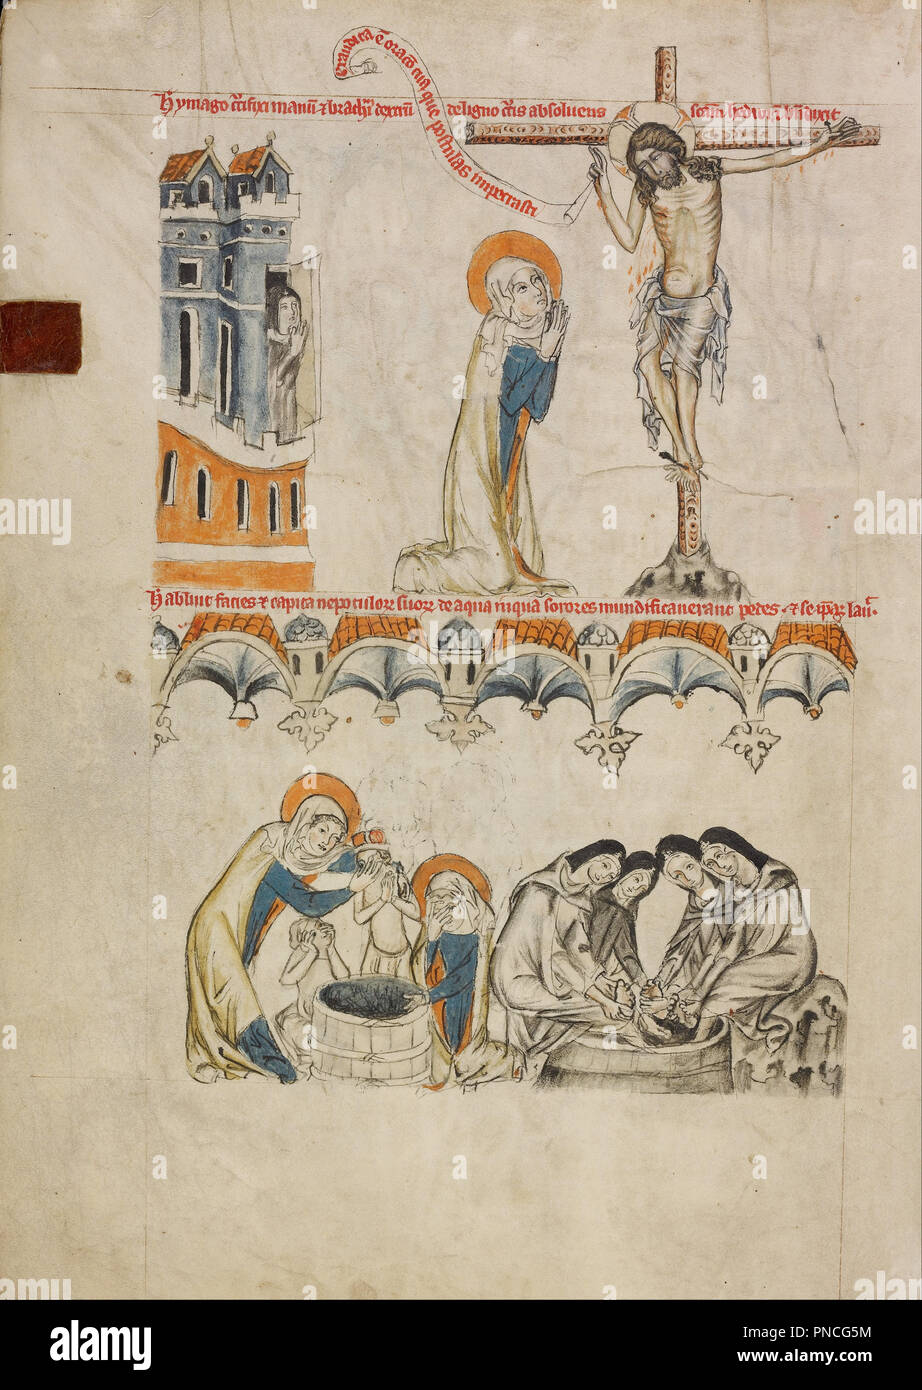 Christ Blessing Saint Hedwig; Saint Hedwig Washing Her Grandson's Face. Date/Period: 1353. Folio. Tempera colors, colored washes, and ink on parchment. Height: 341 mm (13.42 in); Width: 248 mm (9.76 in). Author: Court workshop of Duke Ludwig I of Liegnitz and Brieg. Stock Photo